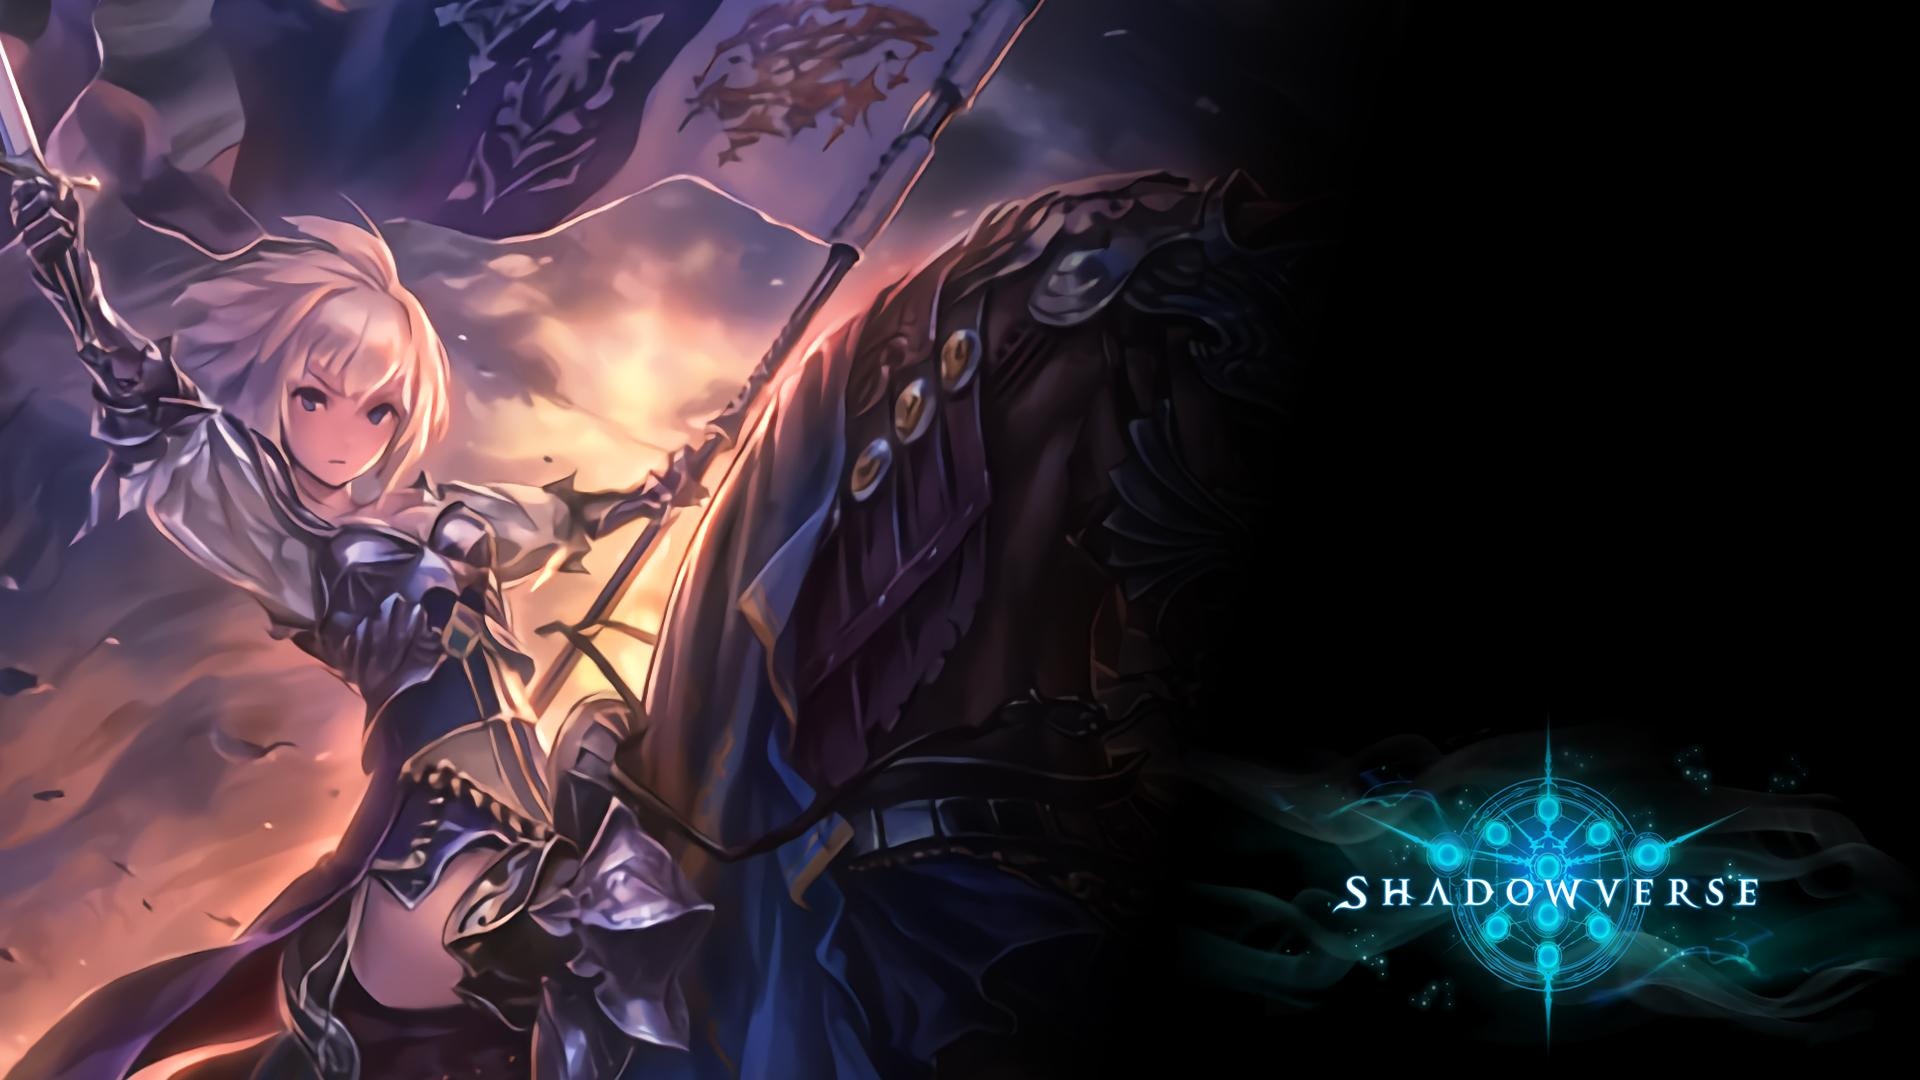 Diverse Shadowverse wallpapers, Artistic backgrounds, Gaming inspiration, HD quality, 1920x1080 Full HD Desktop